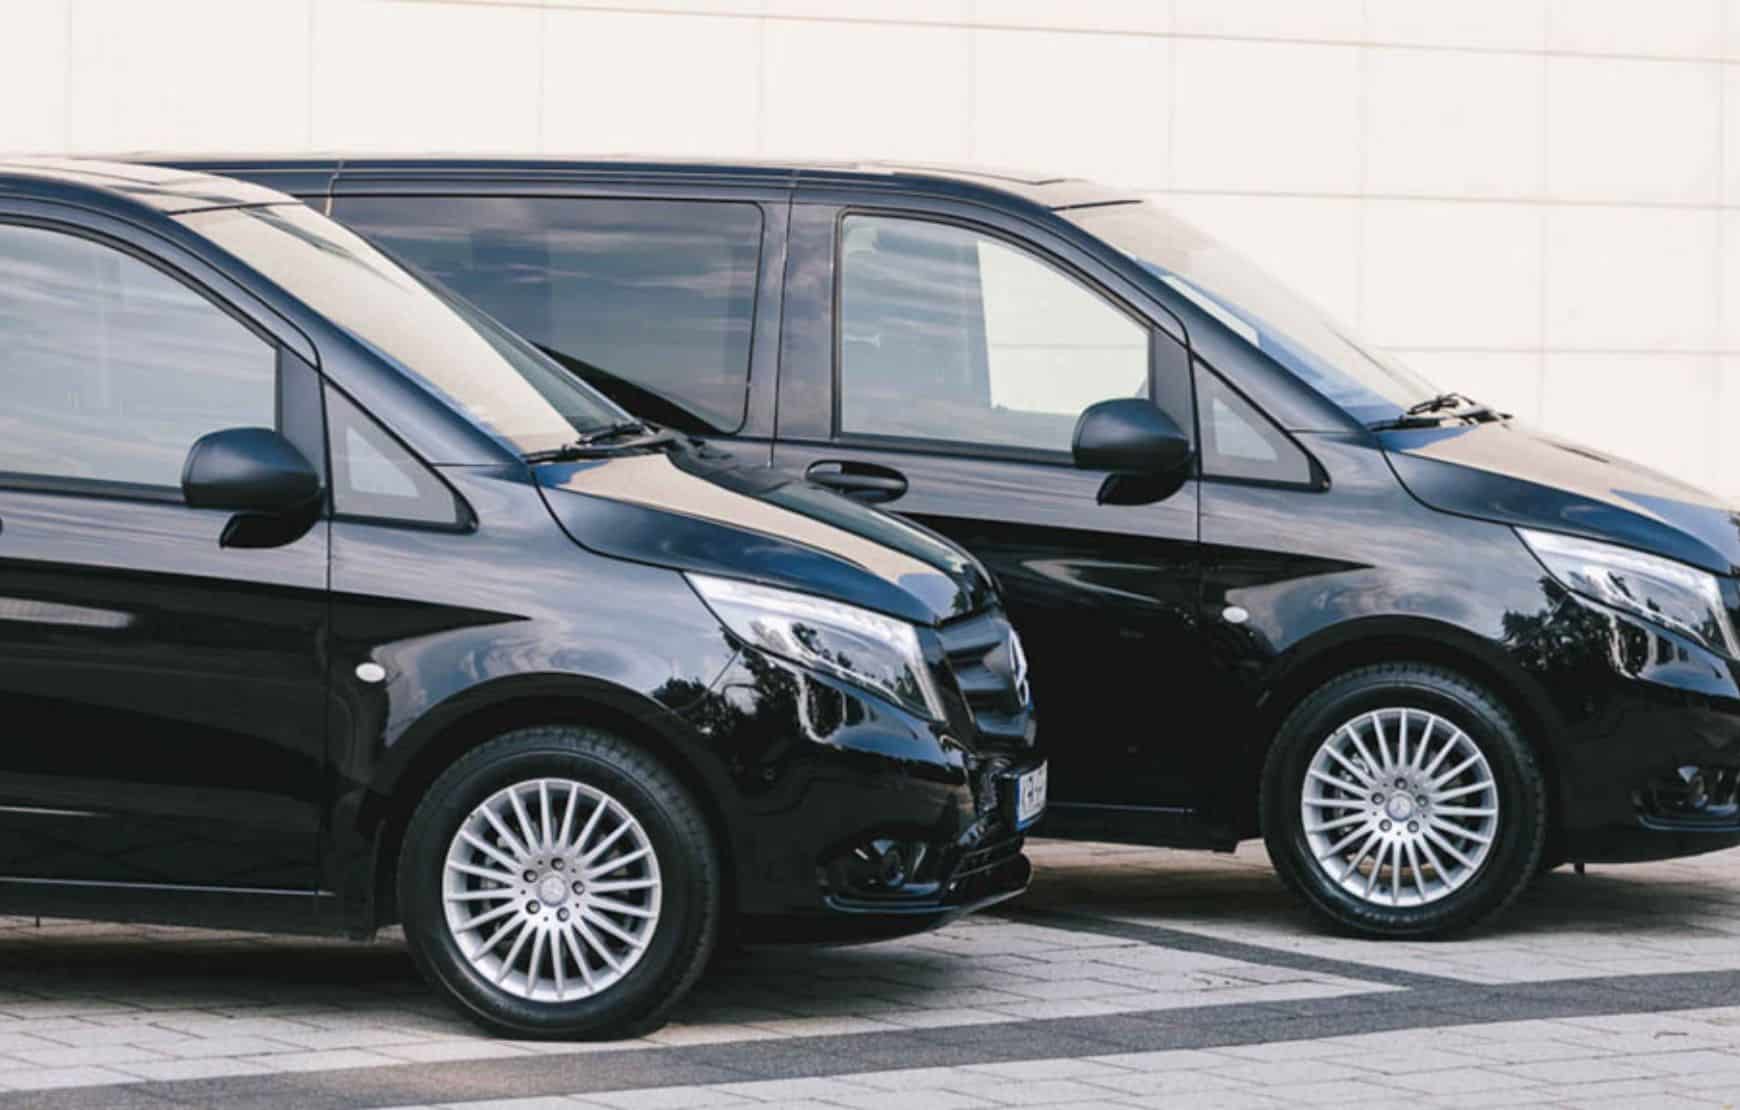 We use luxury Mercedes Vehicles in our Istanbul Airport Transfers